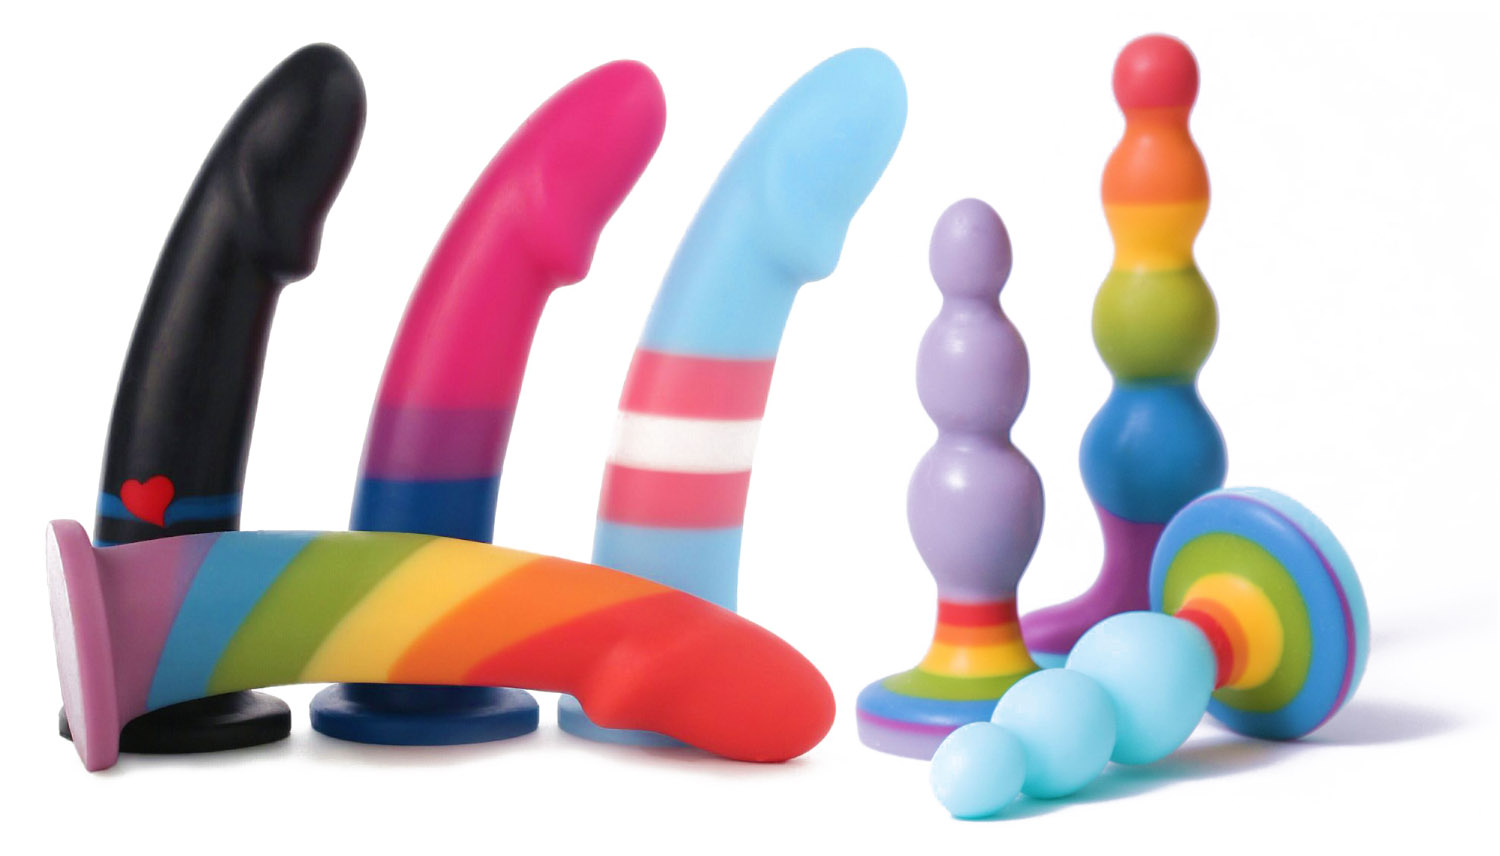 Rainbow dildos, queer butt plugs, and gay sex toys ahoy! 